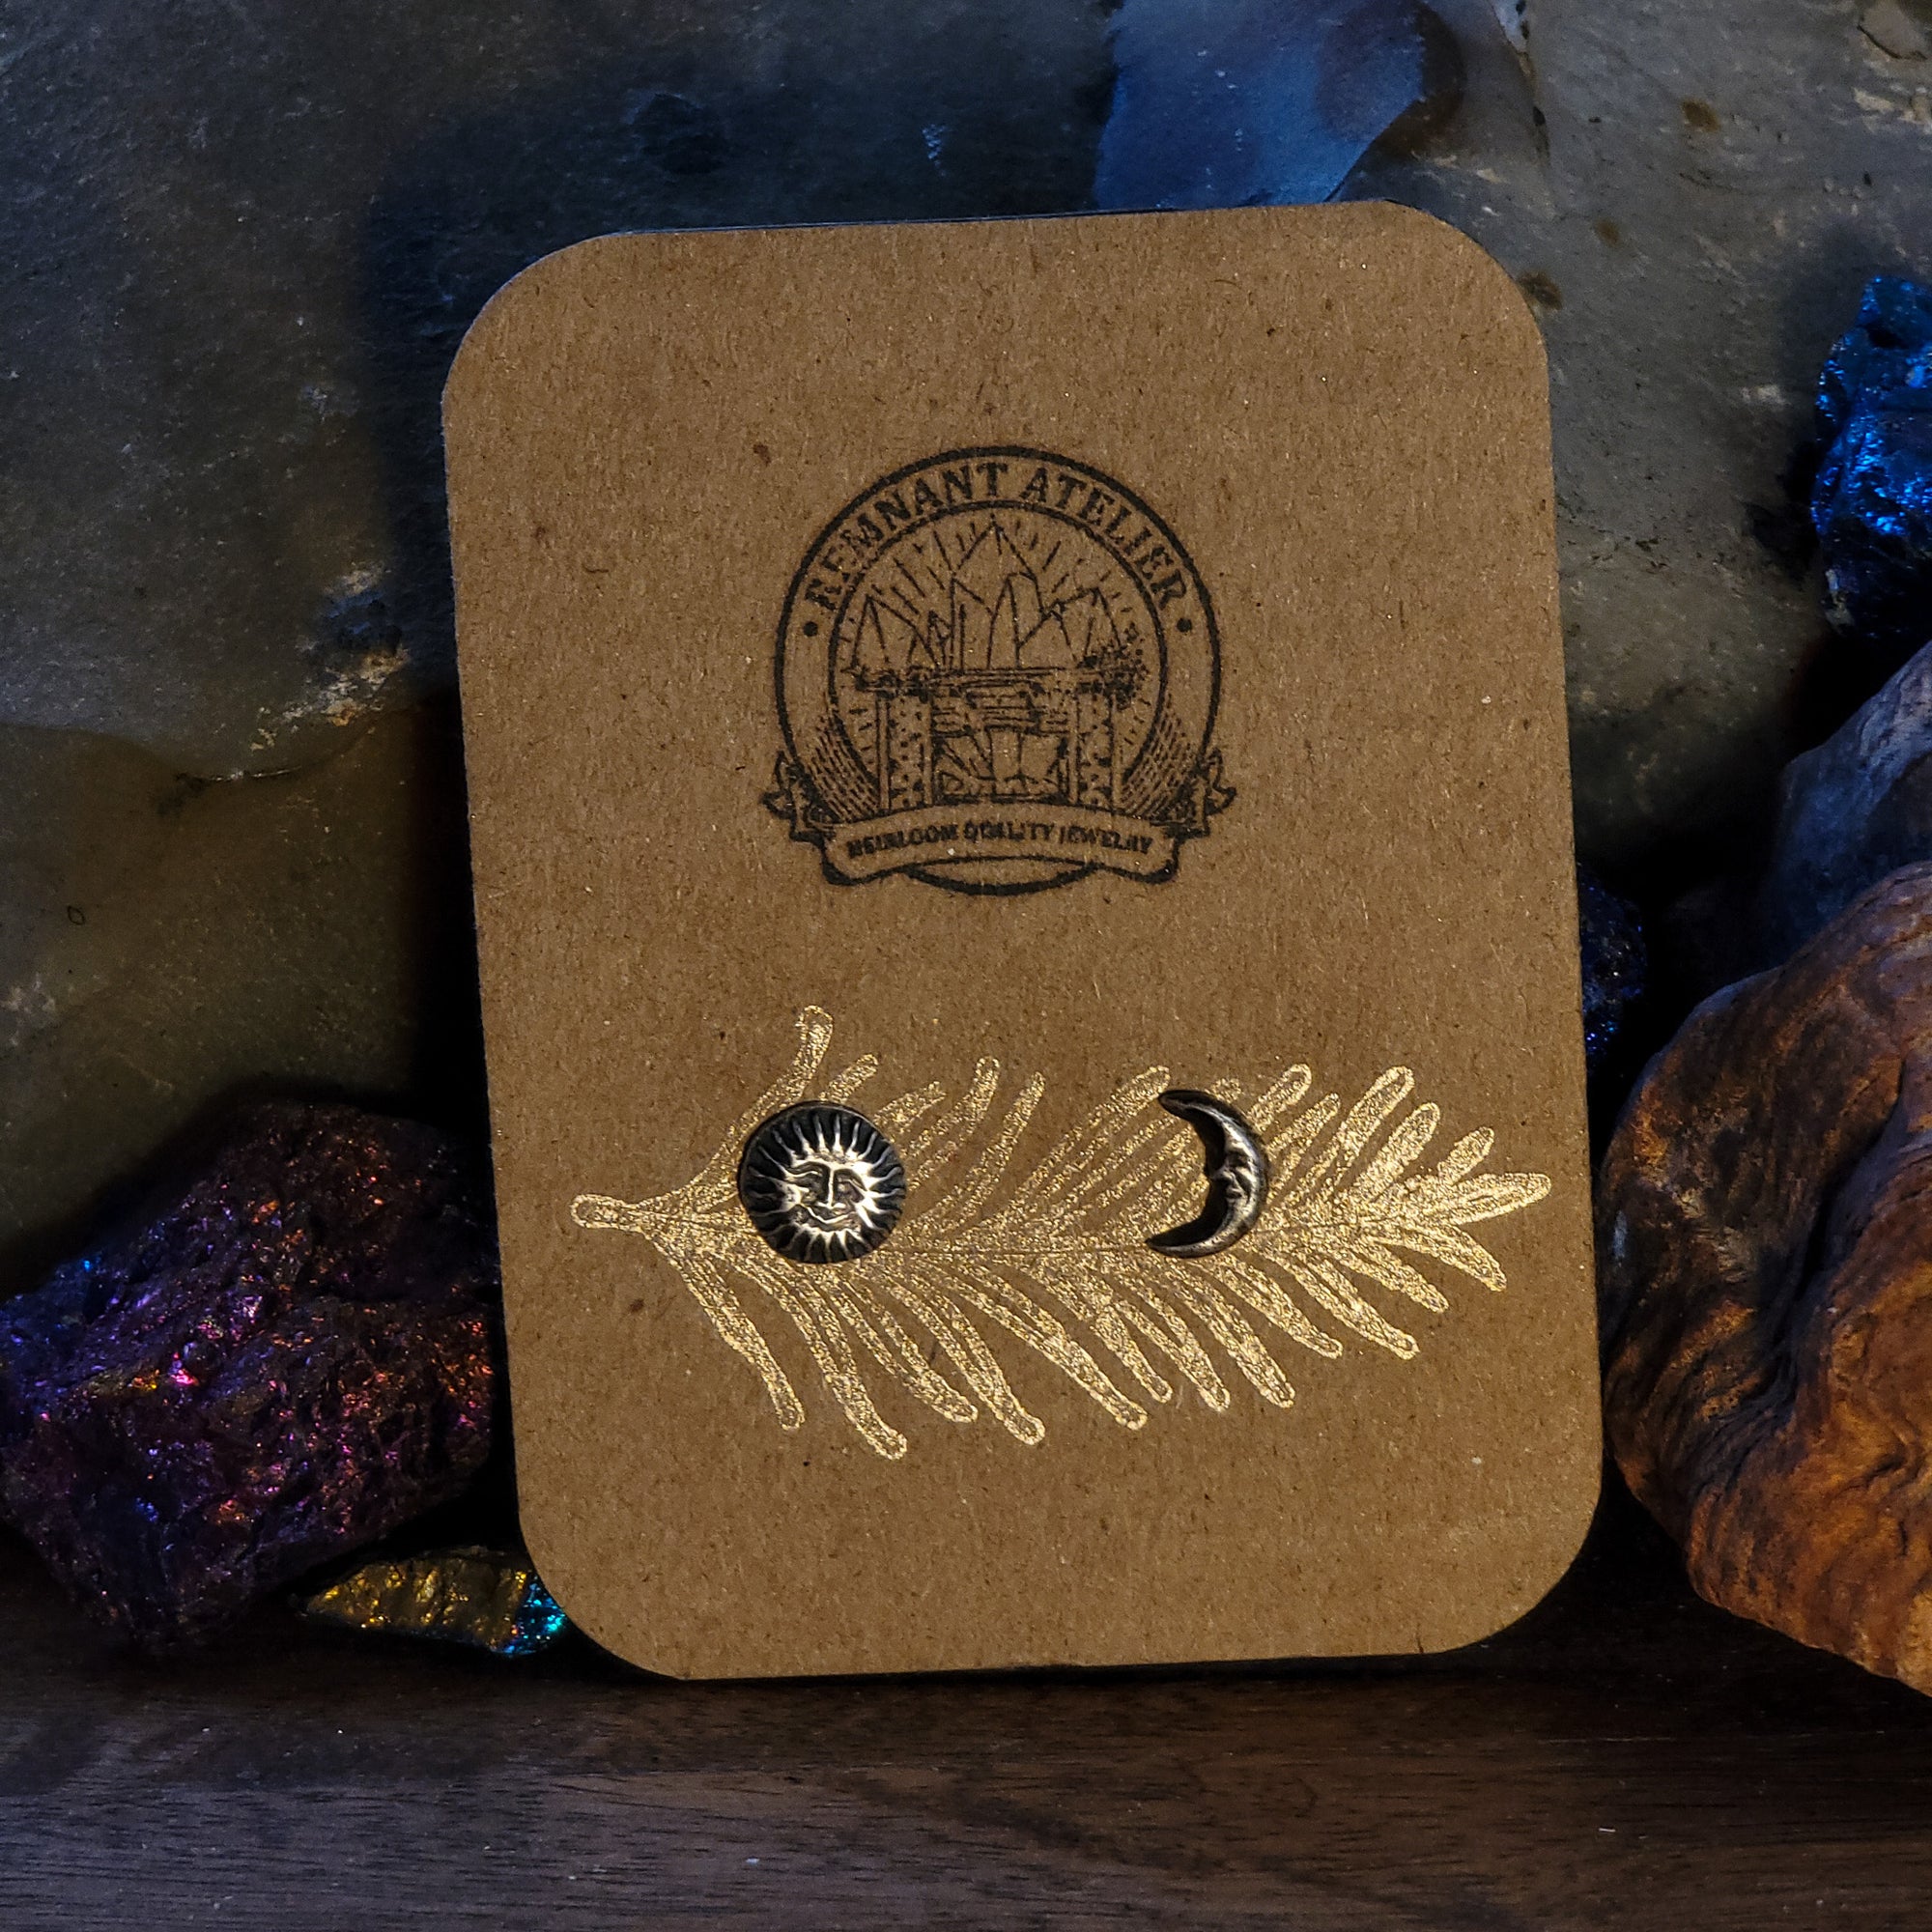 A pair of handmade sterling silver stud earrings shaped like a sun and moon are displayed on a cardboard earring card. The earring card is leaning on crystals. The intricate details of the celestial symbols are highlighted by the shine of the silver